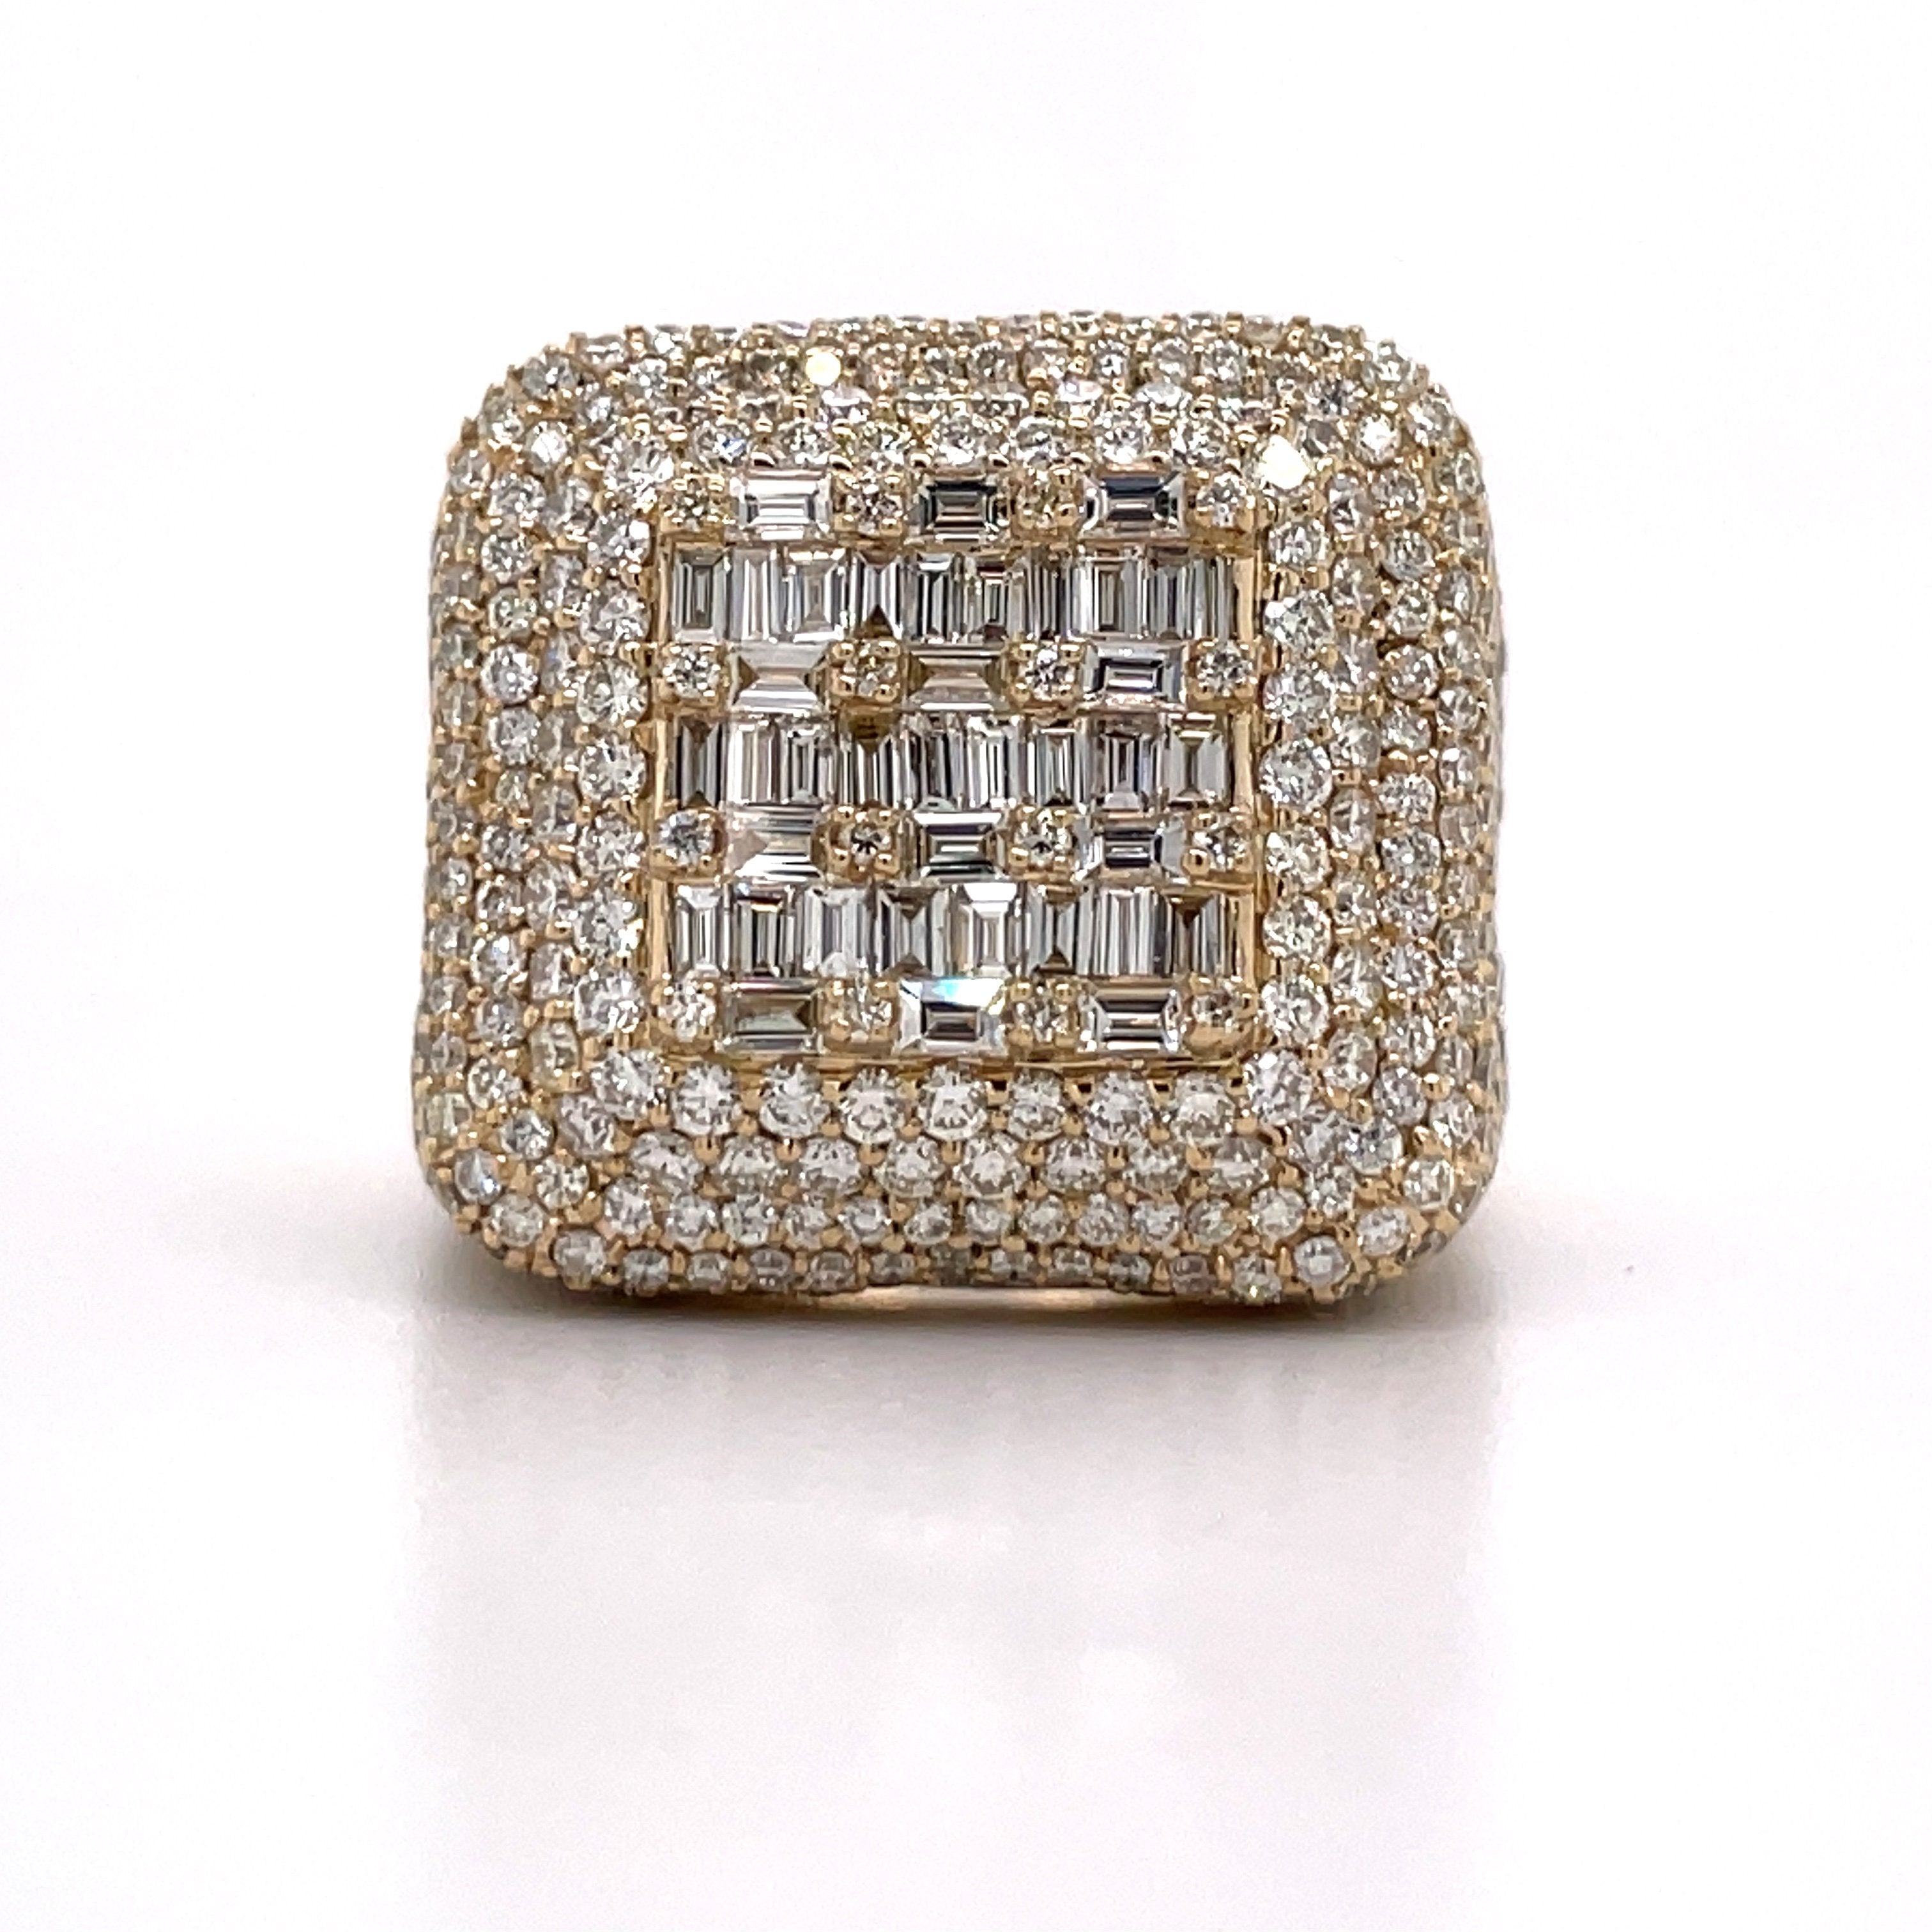 6.00 CT. Diamond Square Baguette Ring in Gold - White Carat - USA & Canada